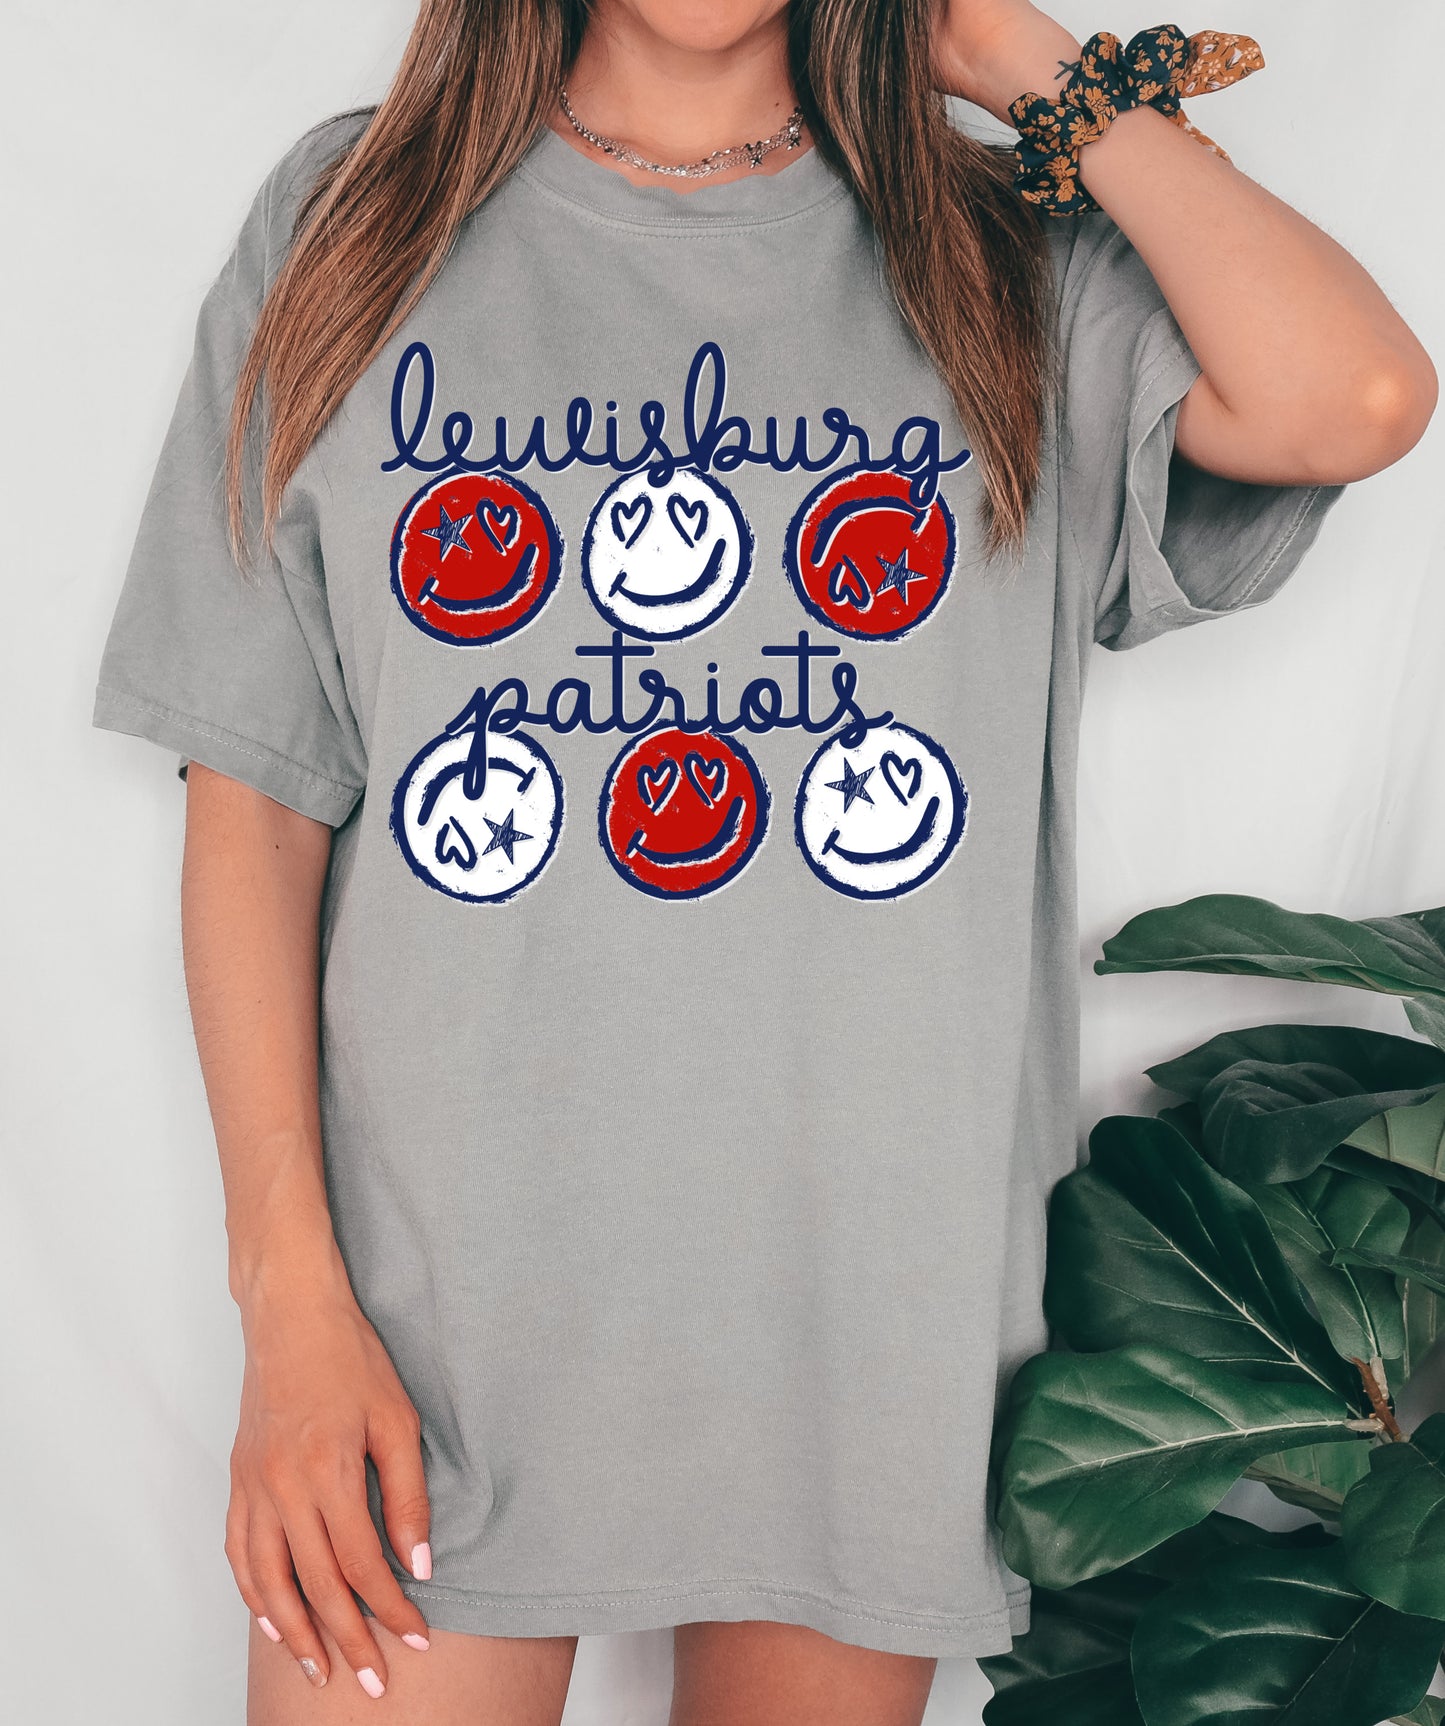 Comfort Colors Lewisburg Smiley Unisex Shirt / Youth and Adult Sizes/ Lewisburg -Desoto County Schools /Lewisburg Patriots Mississippi School Shirt